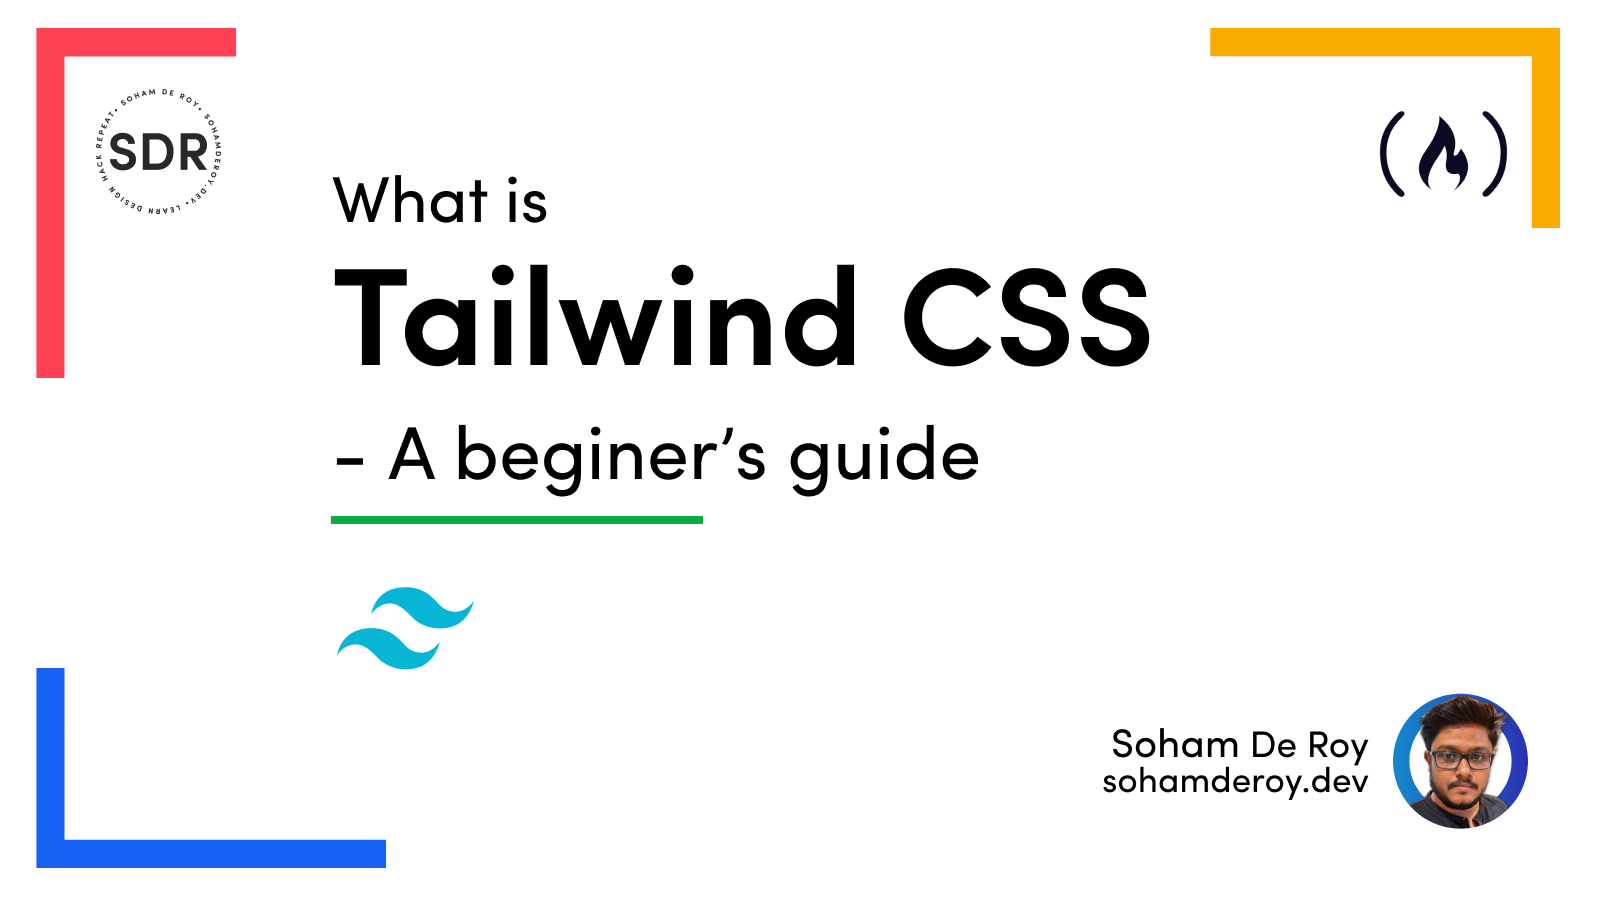 What is Tailwind CSS? A Beginner's Guide